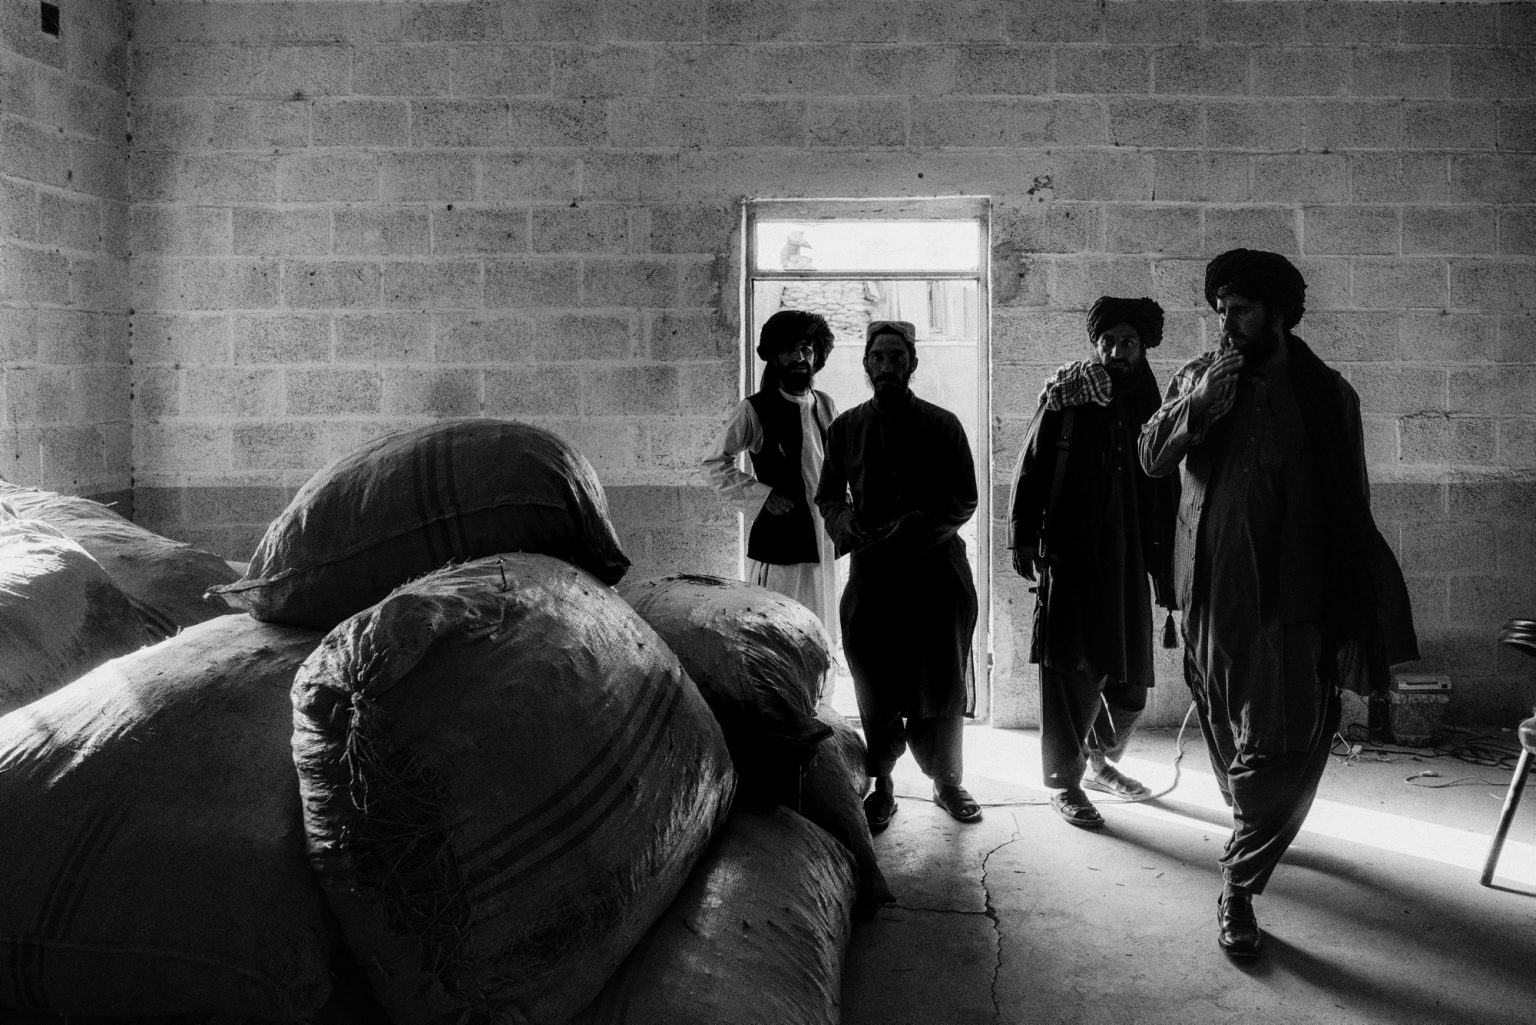 FARAH PROVINCE, AFGHANISTAN - MARCH 18, 2022:
Taliban fighters enter a warehouse filled with sacks of ephedra plants that they have confiscated. The plan is used to produce methamphetamine.
(Photo by Lorenzo Tugnoli/ Washington Post/ Contrasto)